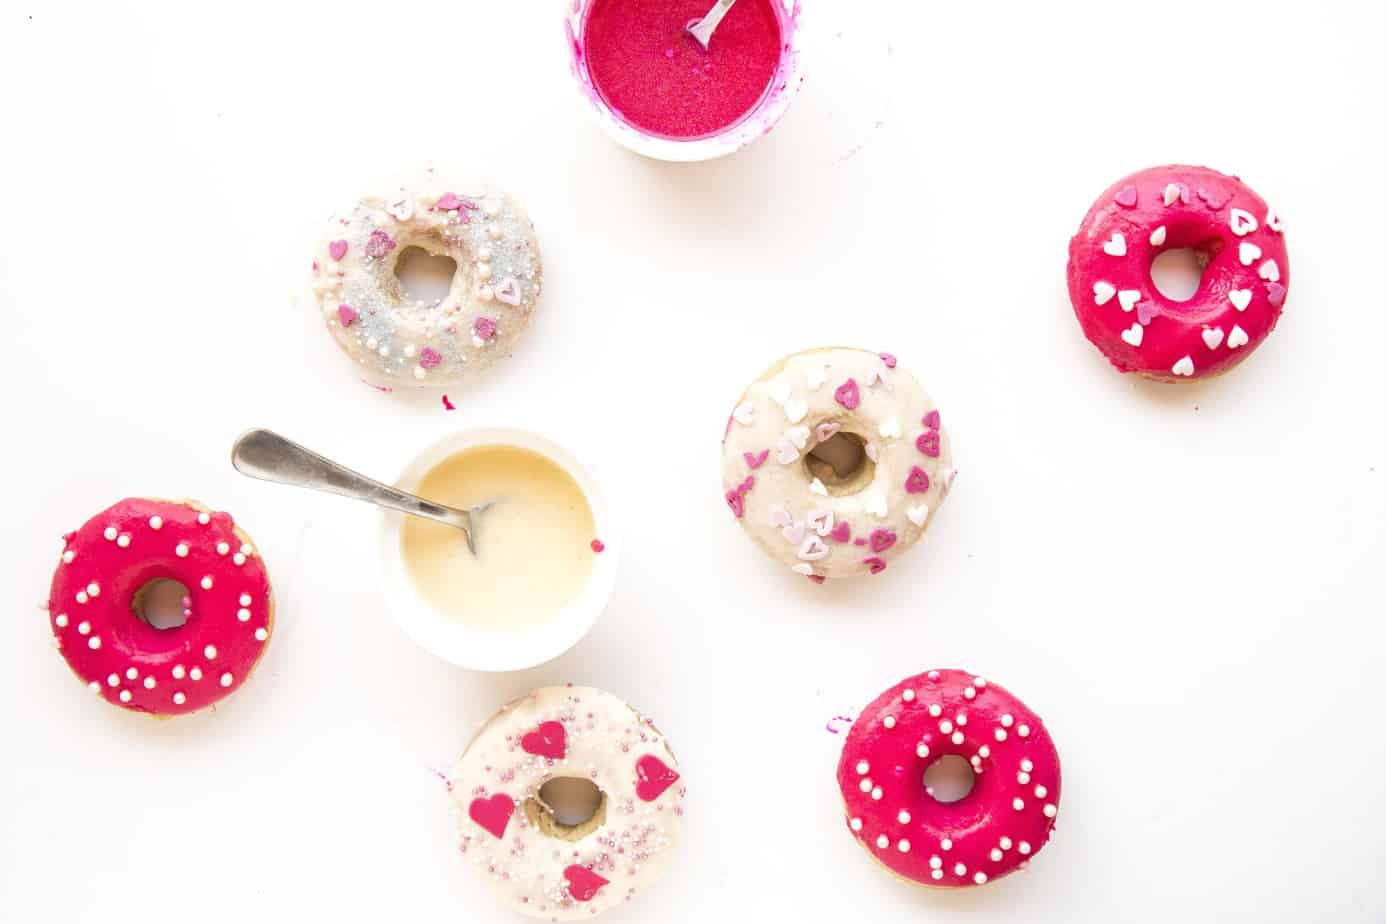 Donuts with heart sprinkles.